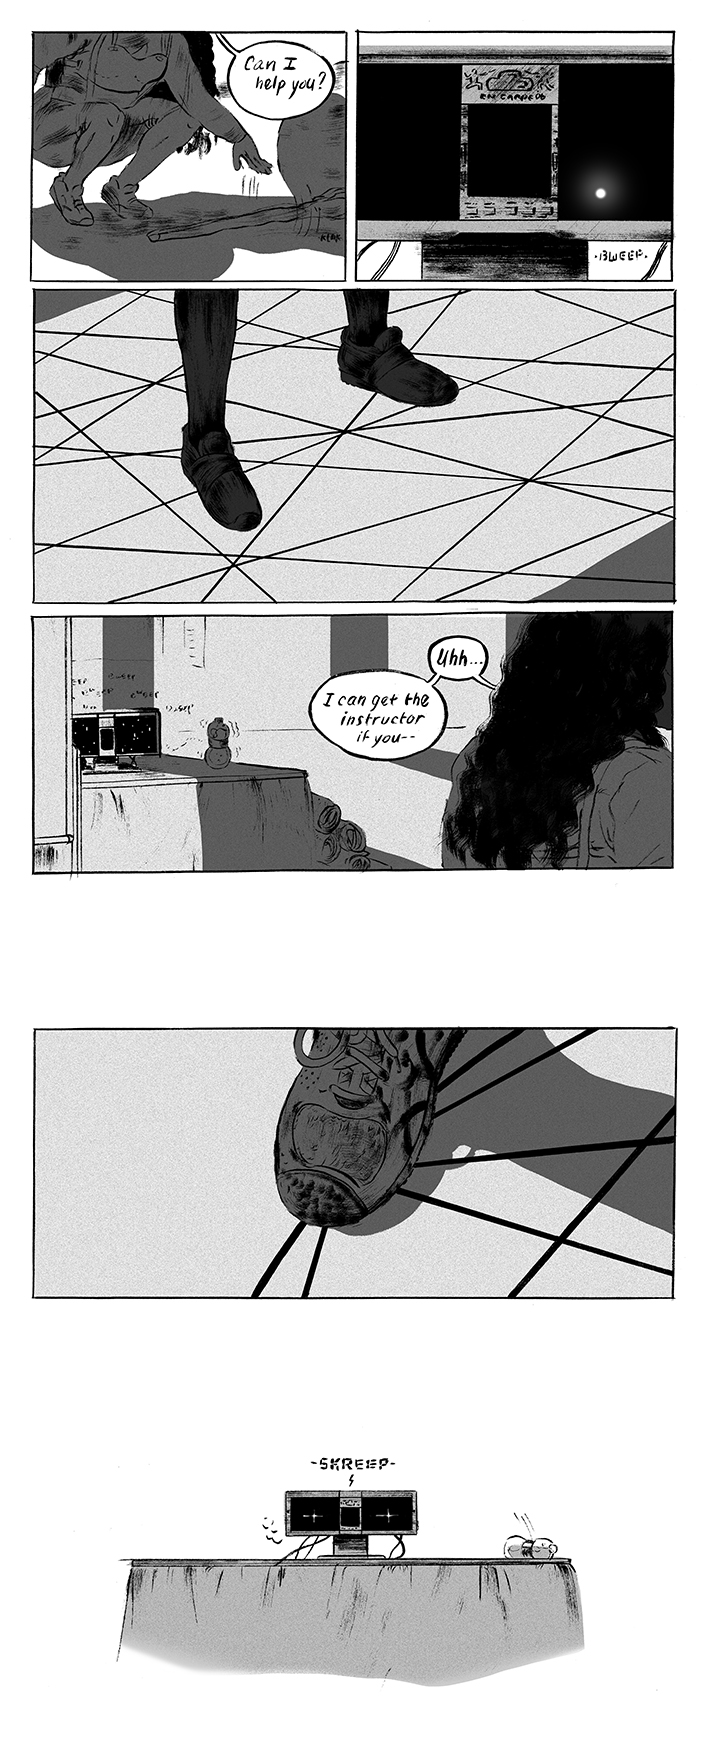 Arm's Length Pt. 2 Panels 10 and 11 by K.L. Ricks